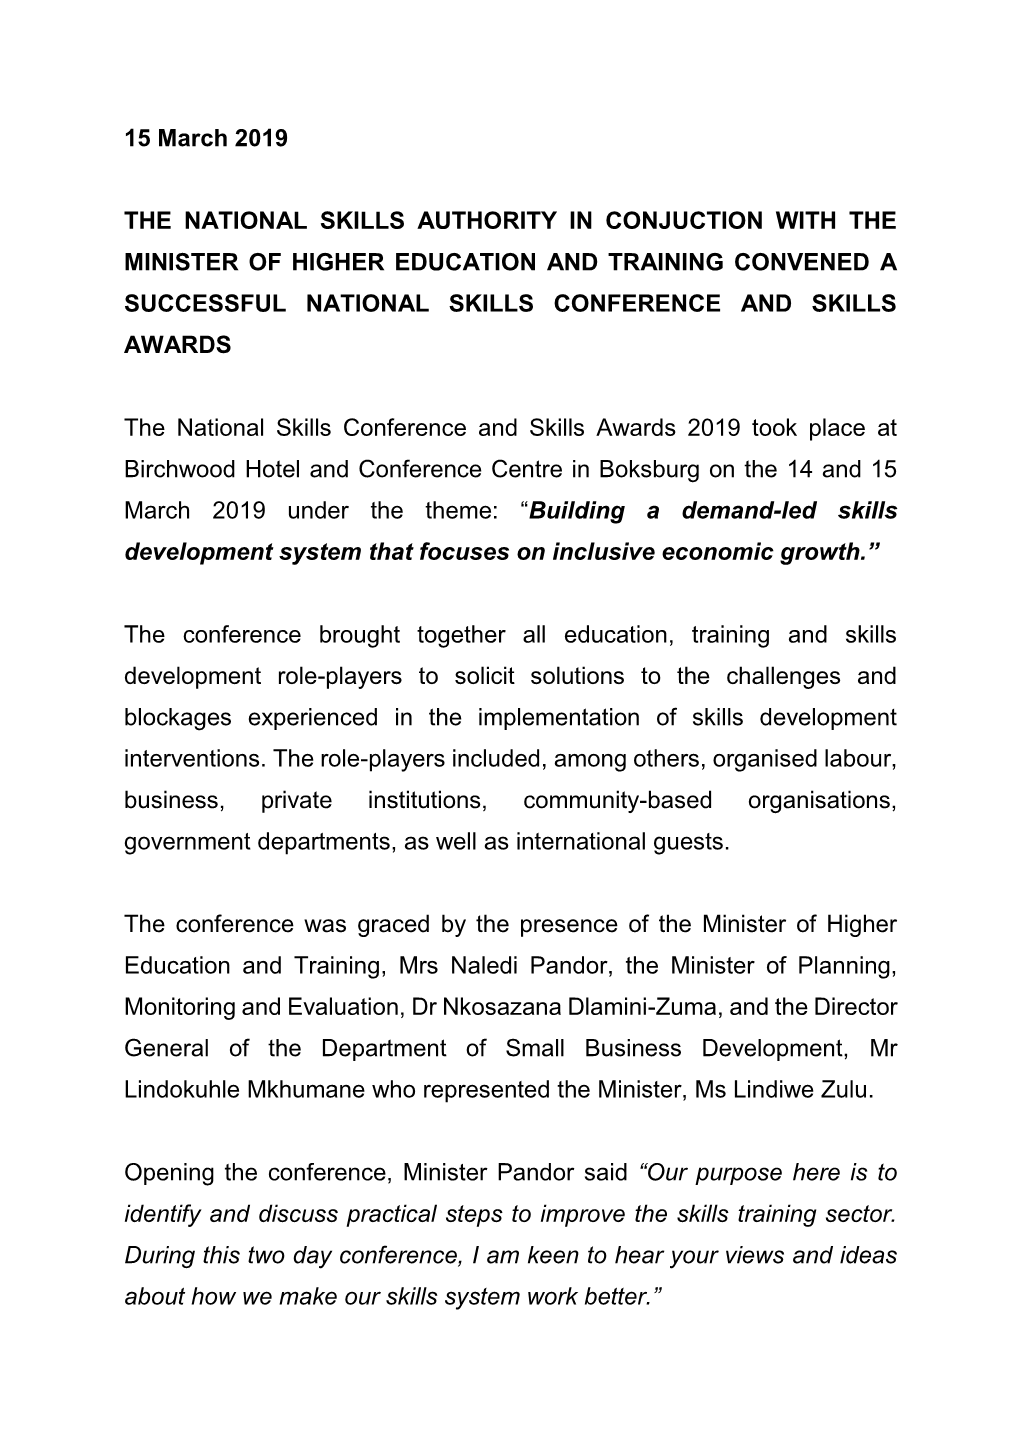 The National Skills Authority in Conjuction with the Minister of Higher Education and Training Convened a Successful National Skills Conference and Skills